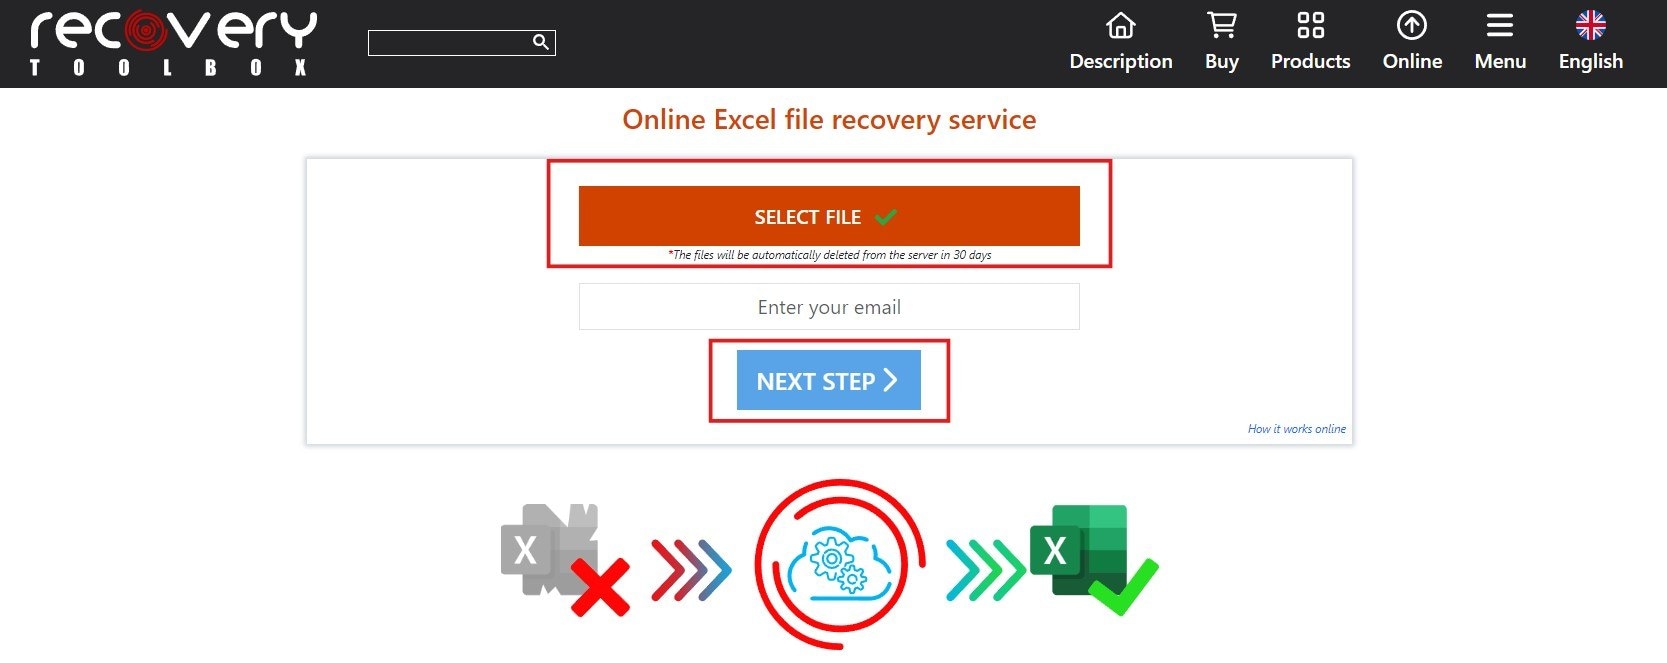 recovery toolbox select file